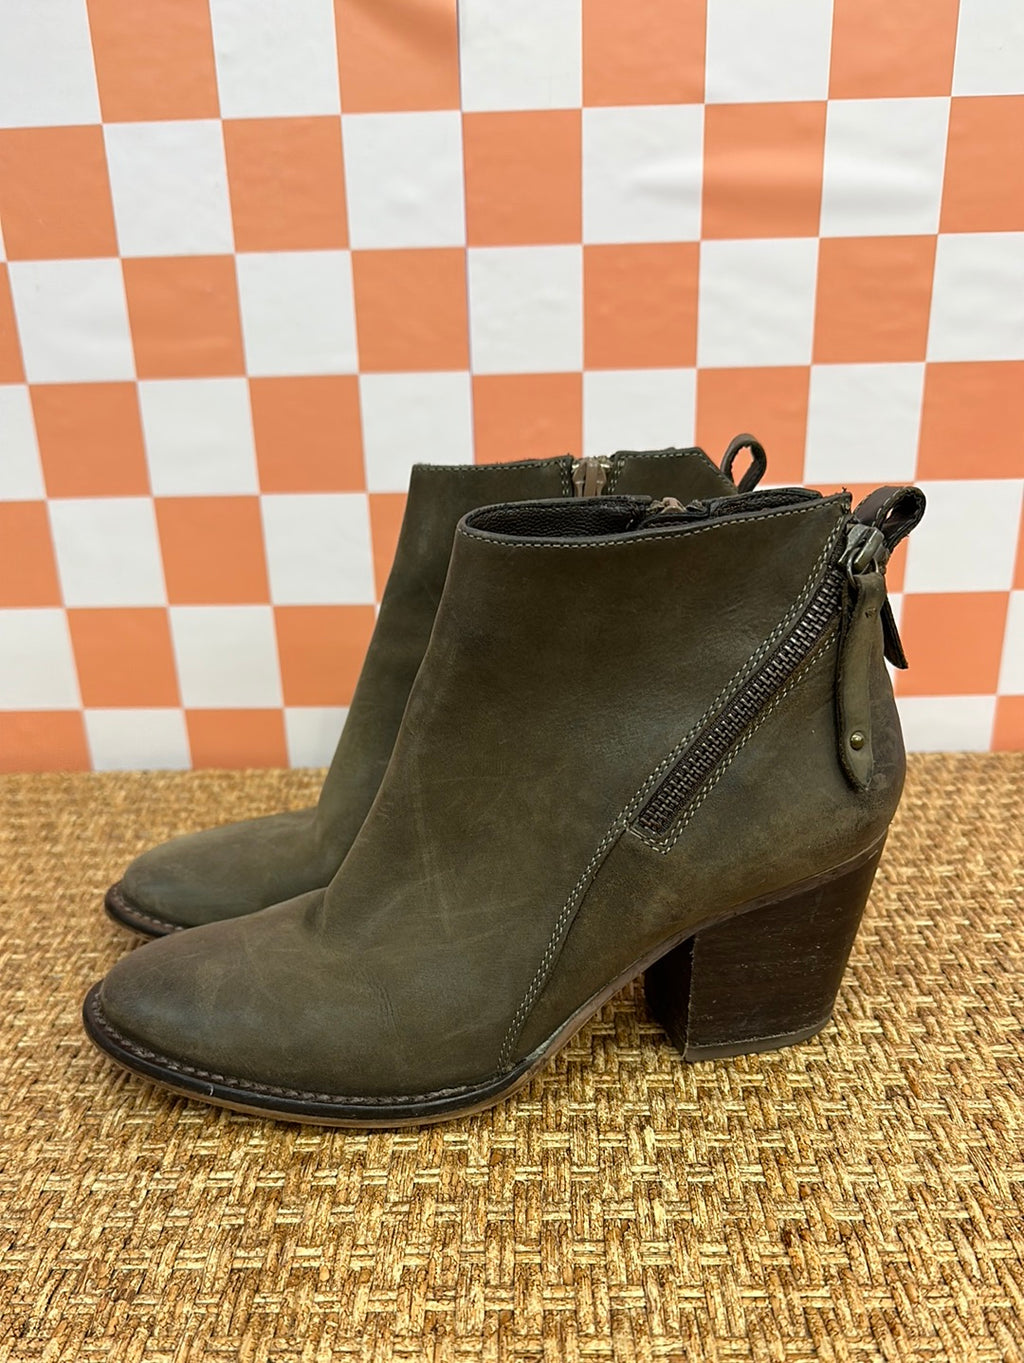 Brown Blondo Heeled Leather Ankle Boots, 6.5